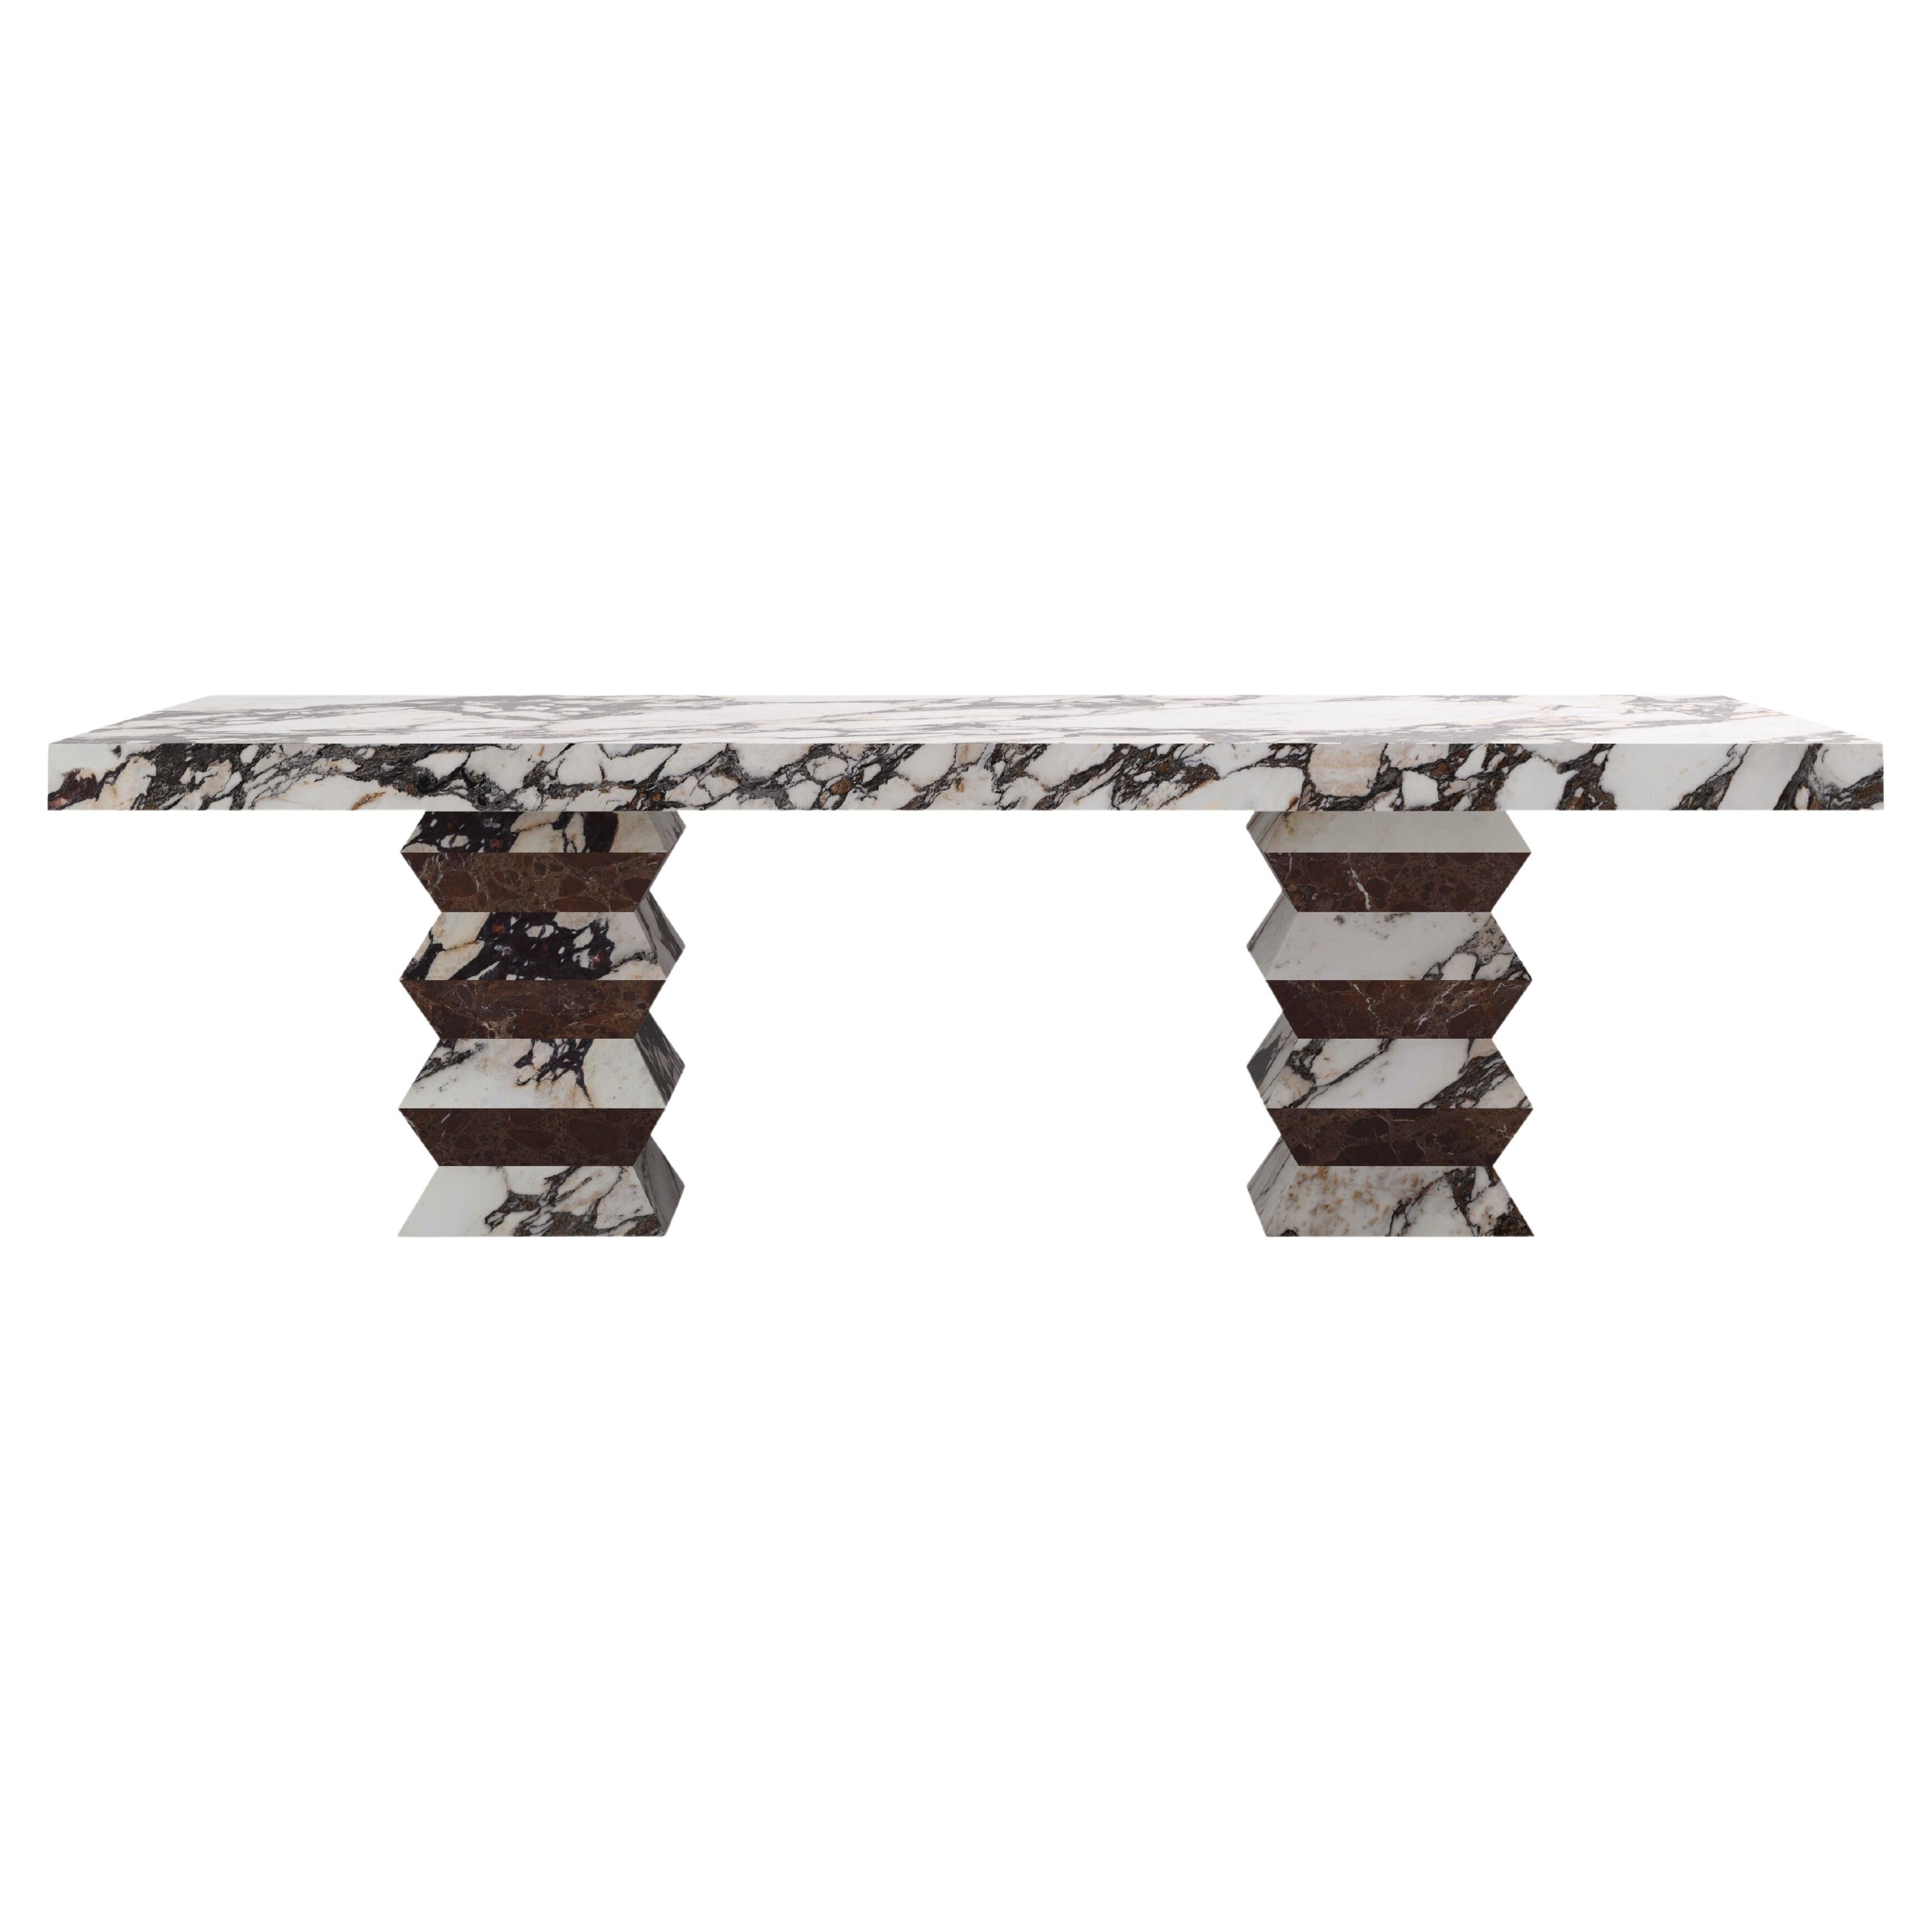 FORM(LA) Grinza Rectangle Dining Table 96"L x 42"W x 32"H Calacatta Viola Marble For Sale